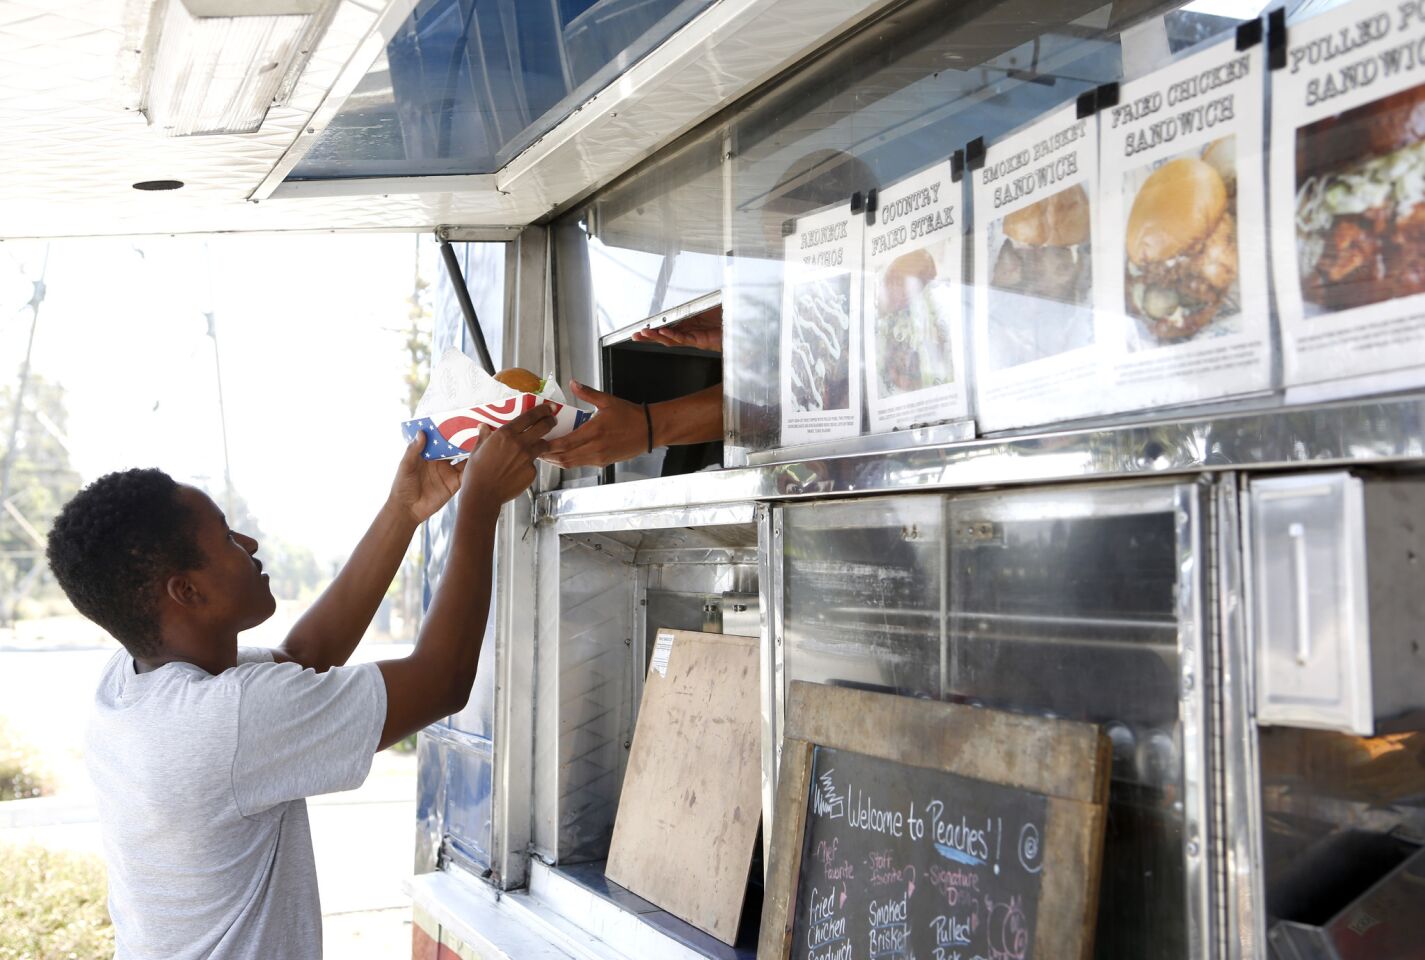 Order up! A customer is just minutes from chowing down on the truck's specialty: Southern food.